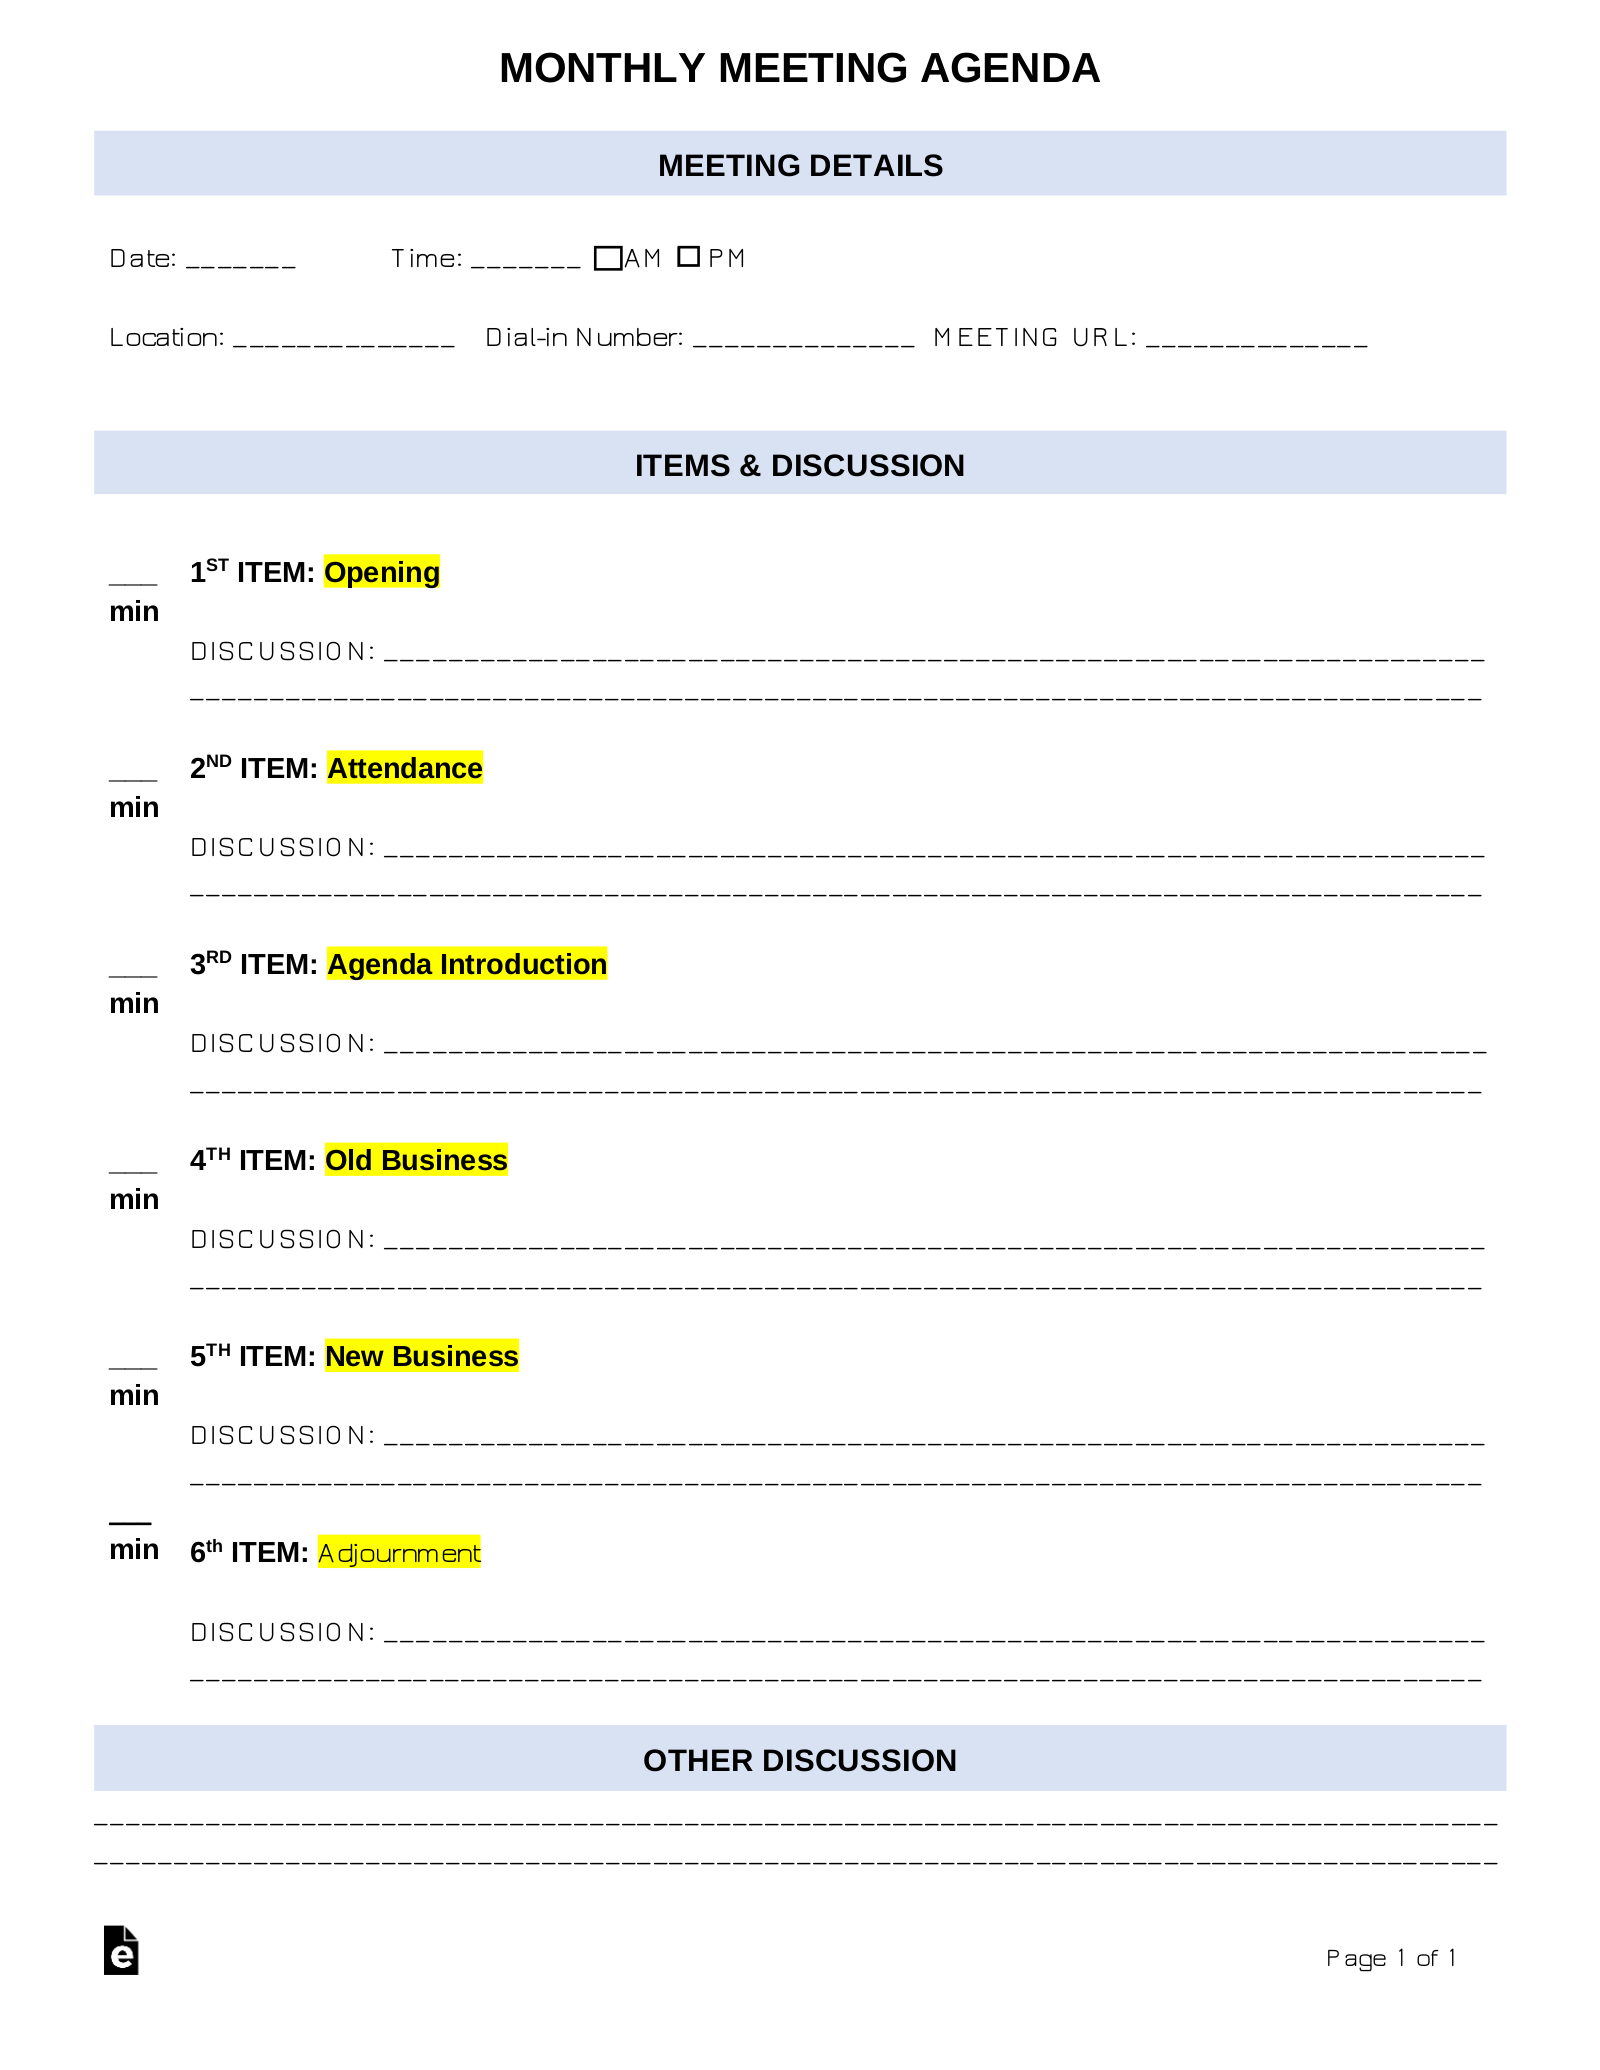 Free Monthly Meeting Agenda Template | Sample Pdf | Word For Multi Day Meeting Agenda Template